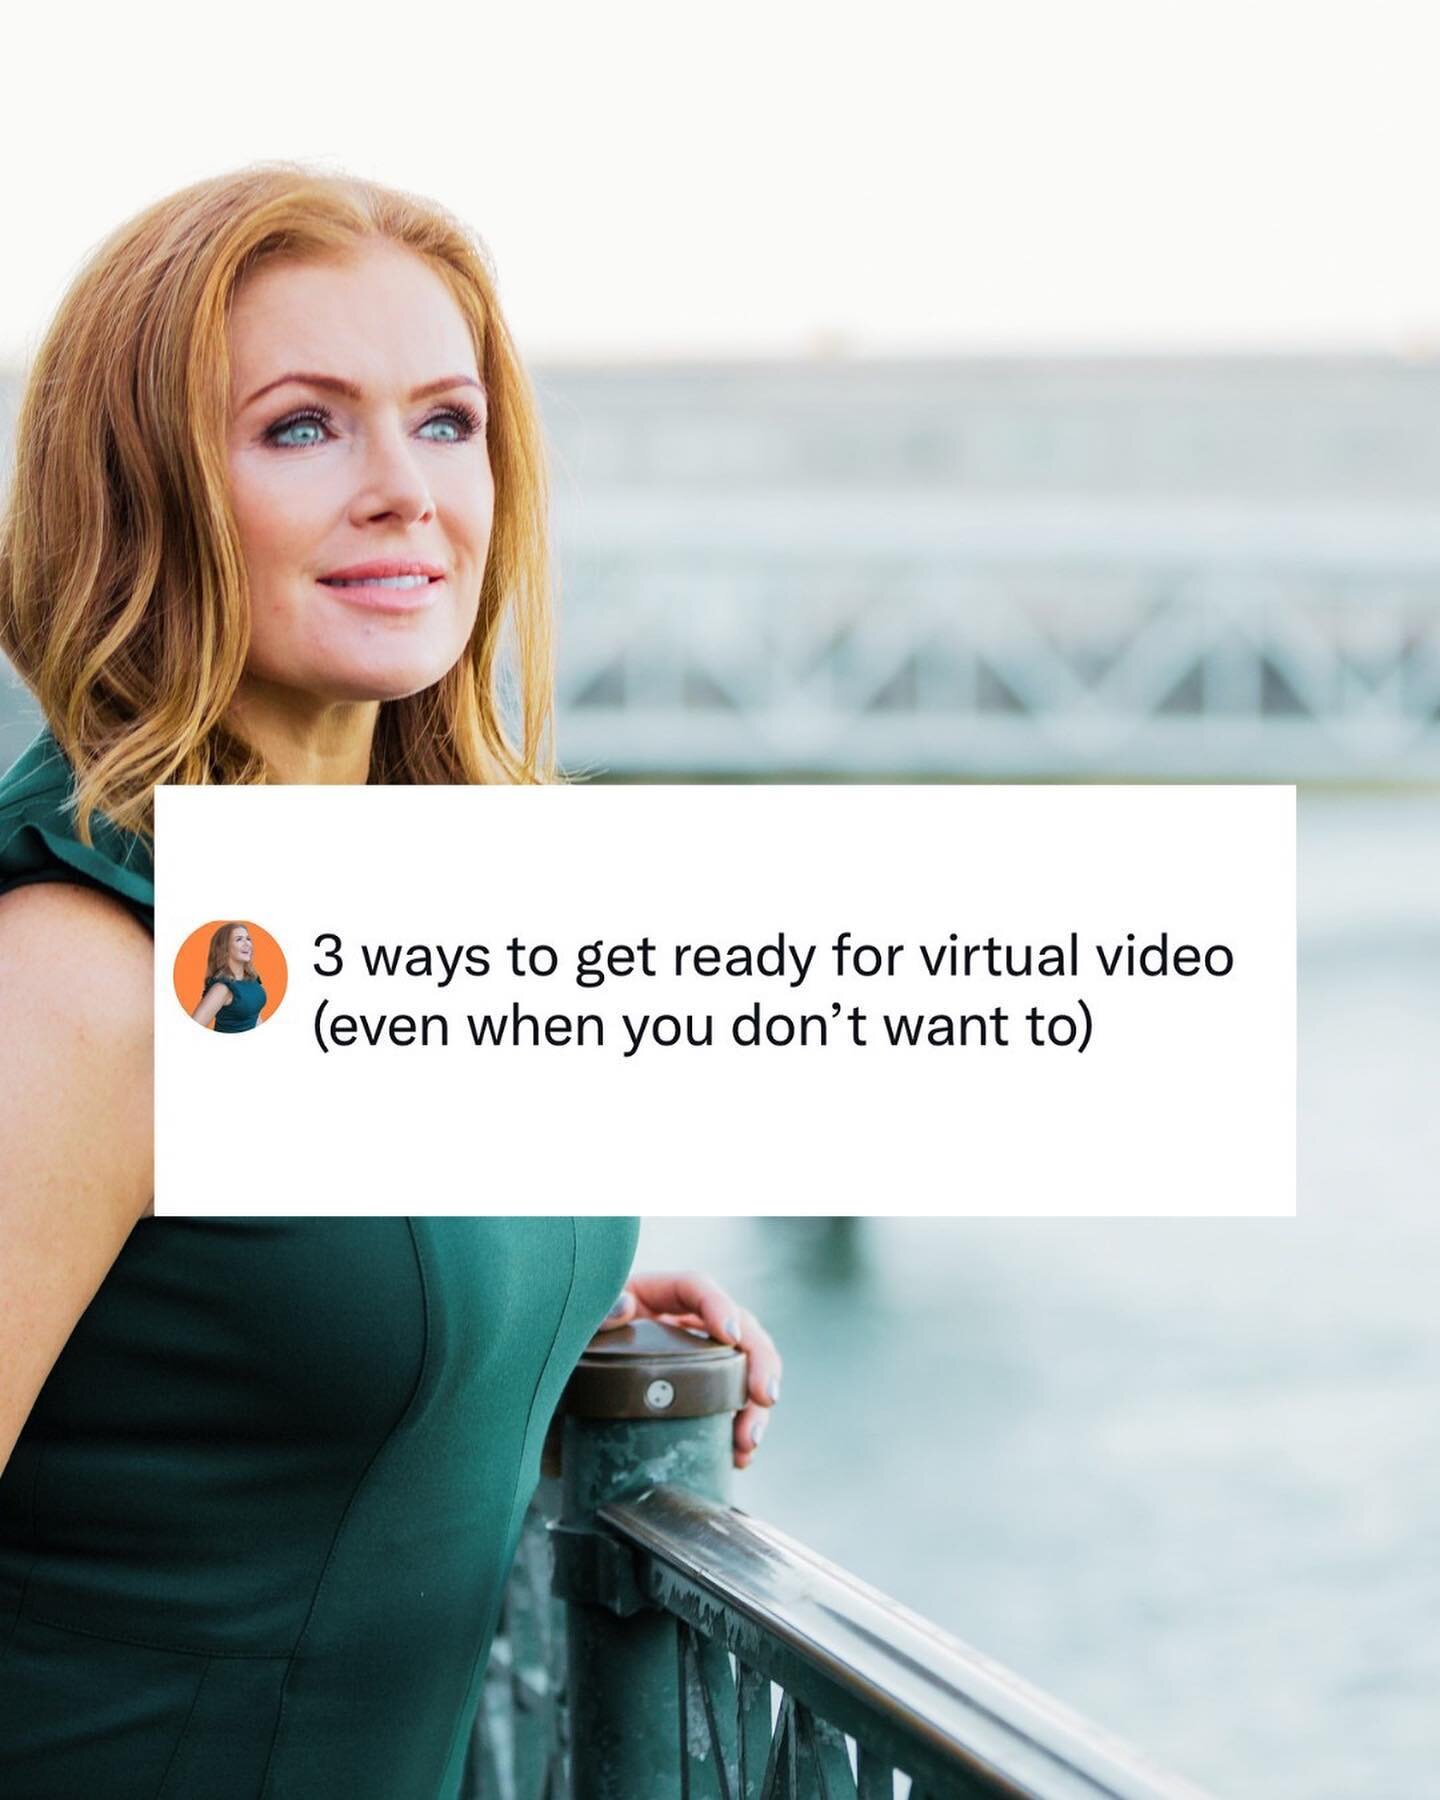 I made a living being on live tv every day, and there are still days when I don't want to show up for a virtual video call. 

➡️ But, when given a choice between a phone or a video call, I ALWAYS choose video. 

🎥 Video gives you a chance to connect